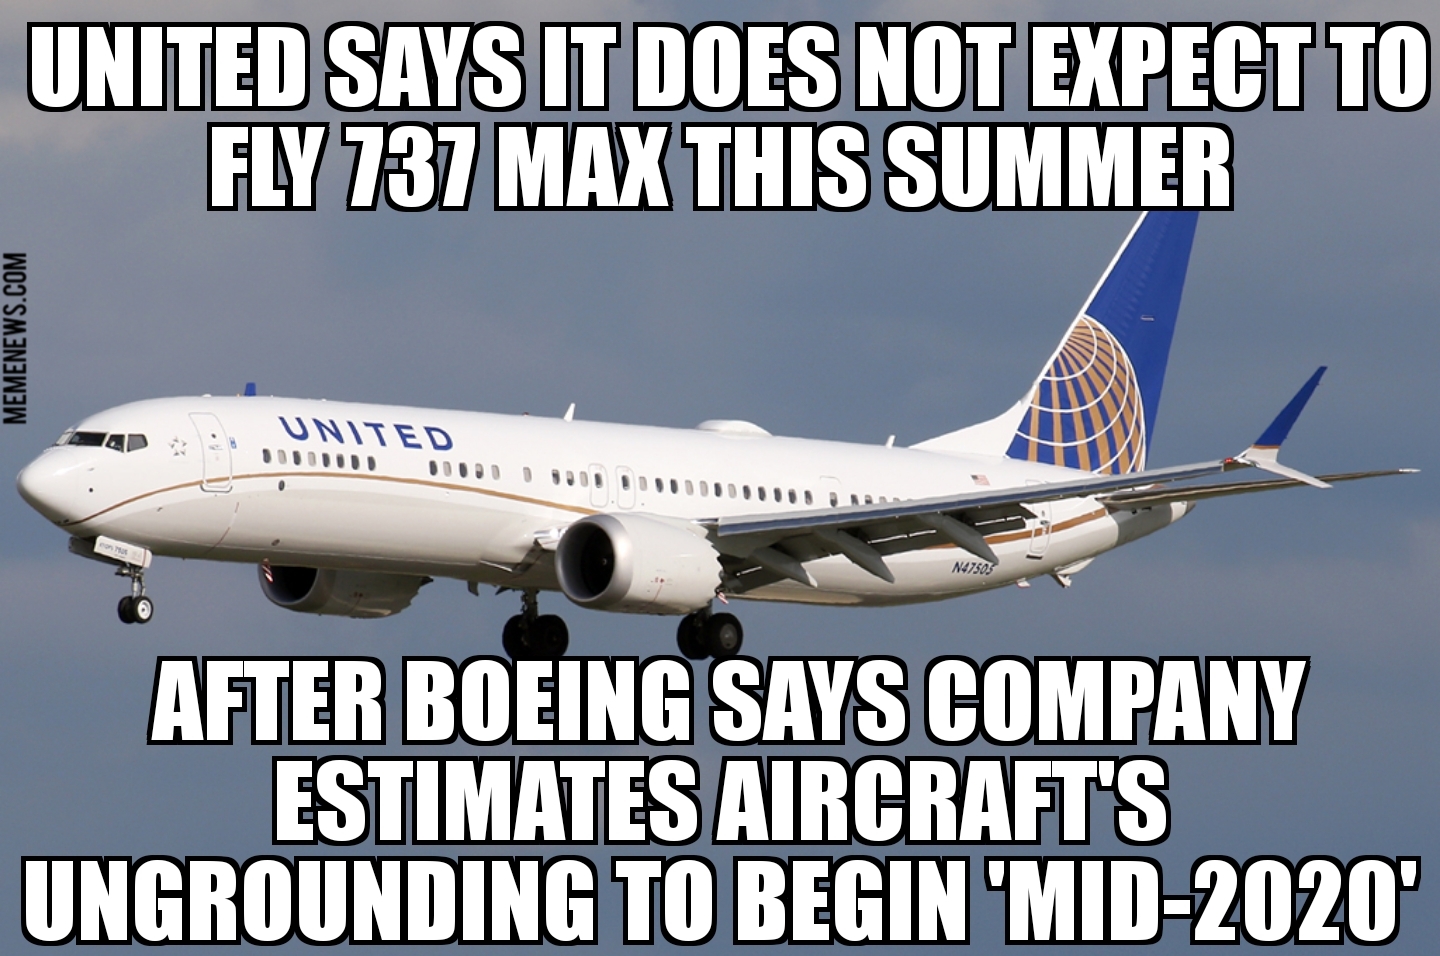 United doesn’t expect to fly 737 Max this summer